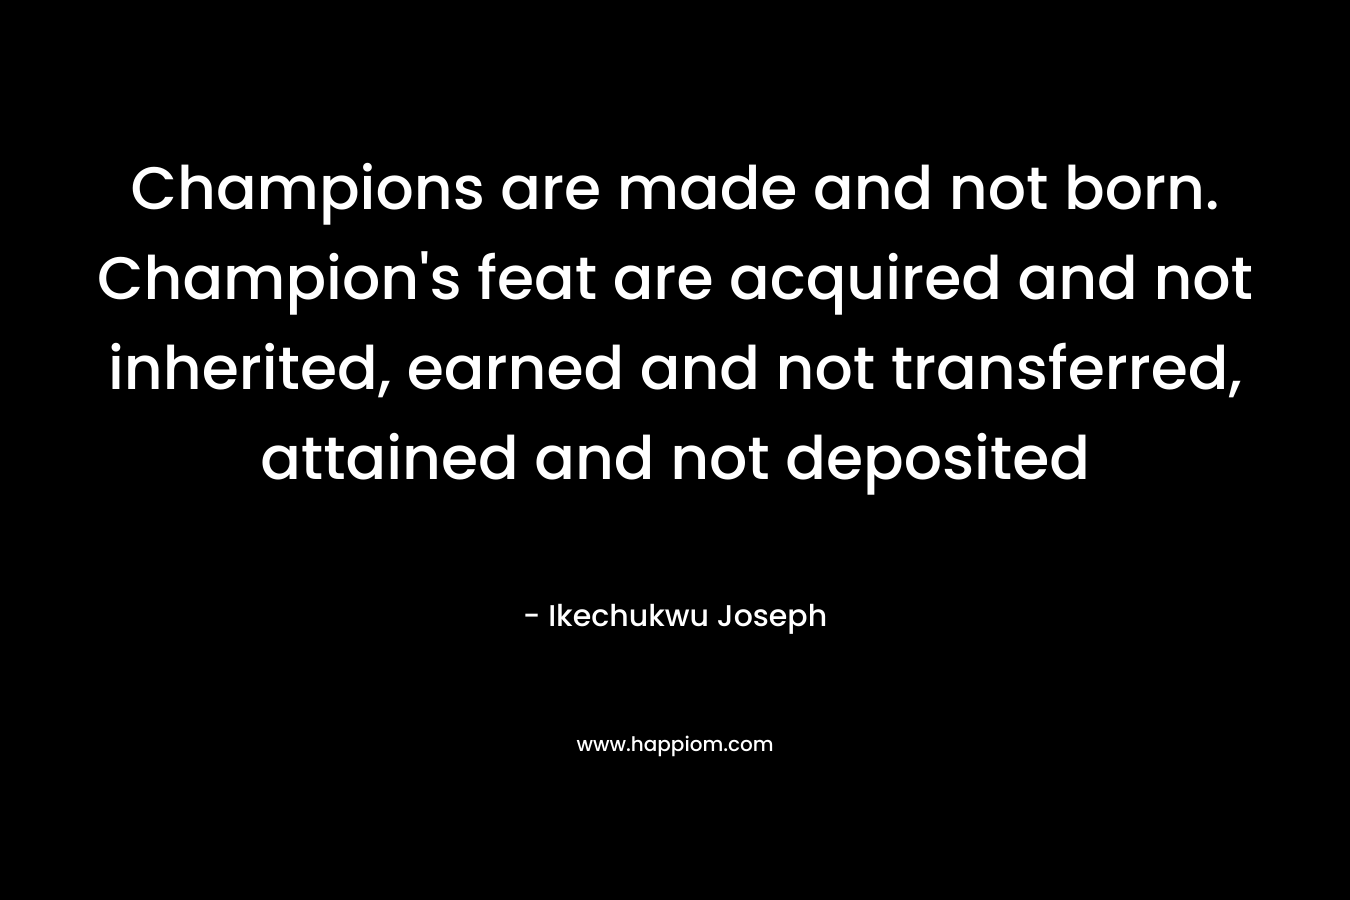 Champions are made and not born. Champion’s feat are acquired and not inherited, earned and not transferred, attained and not deposited – Ikechukwu Joseph